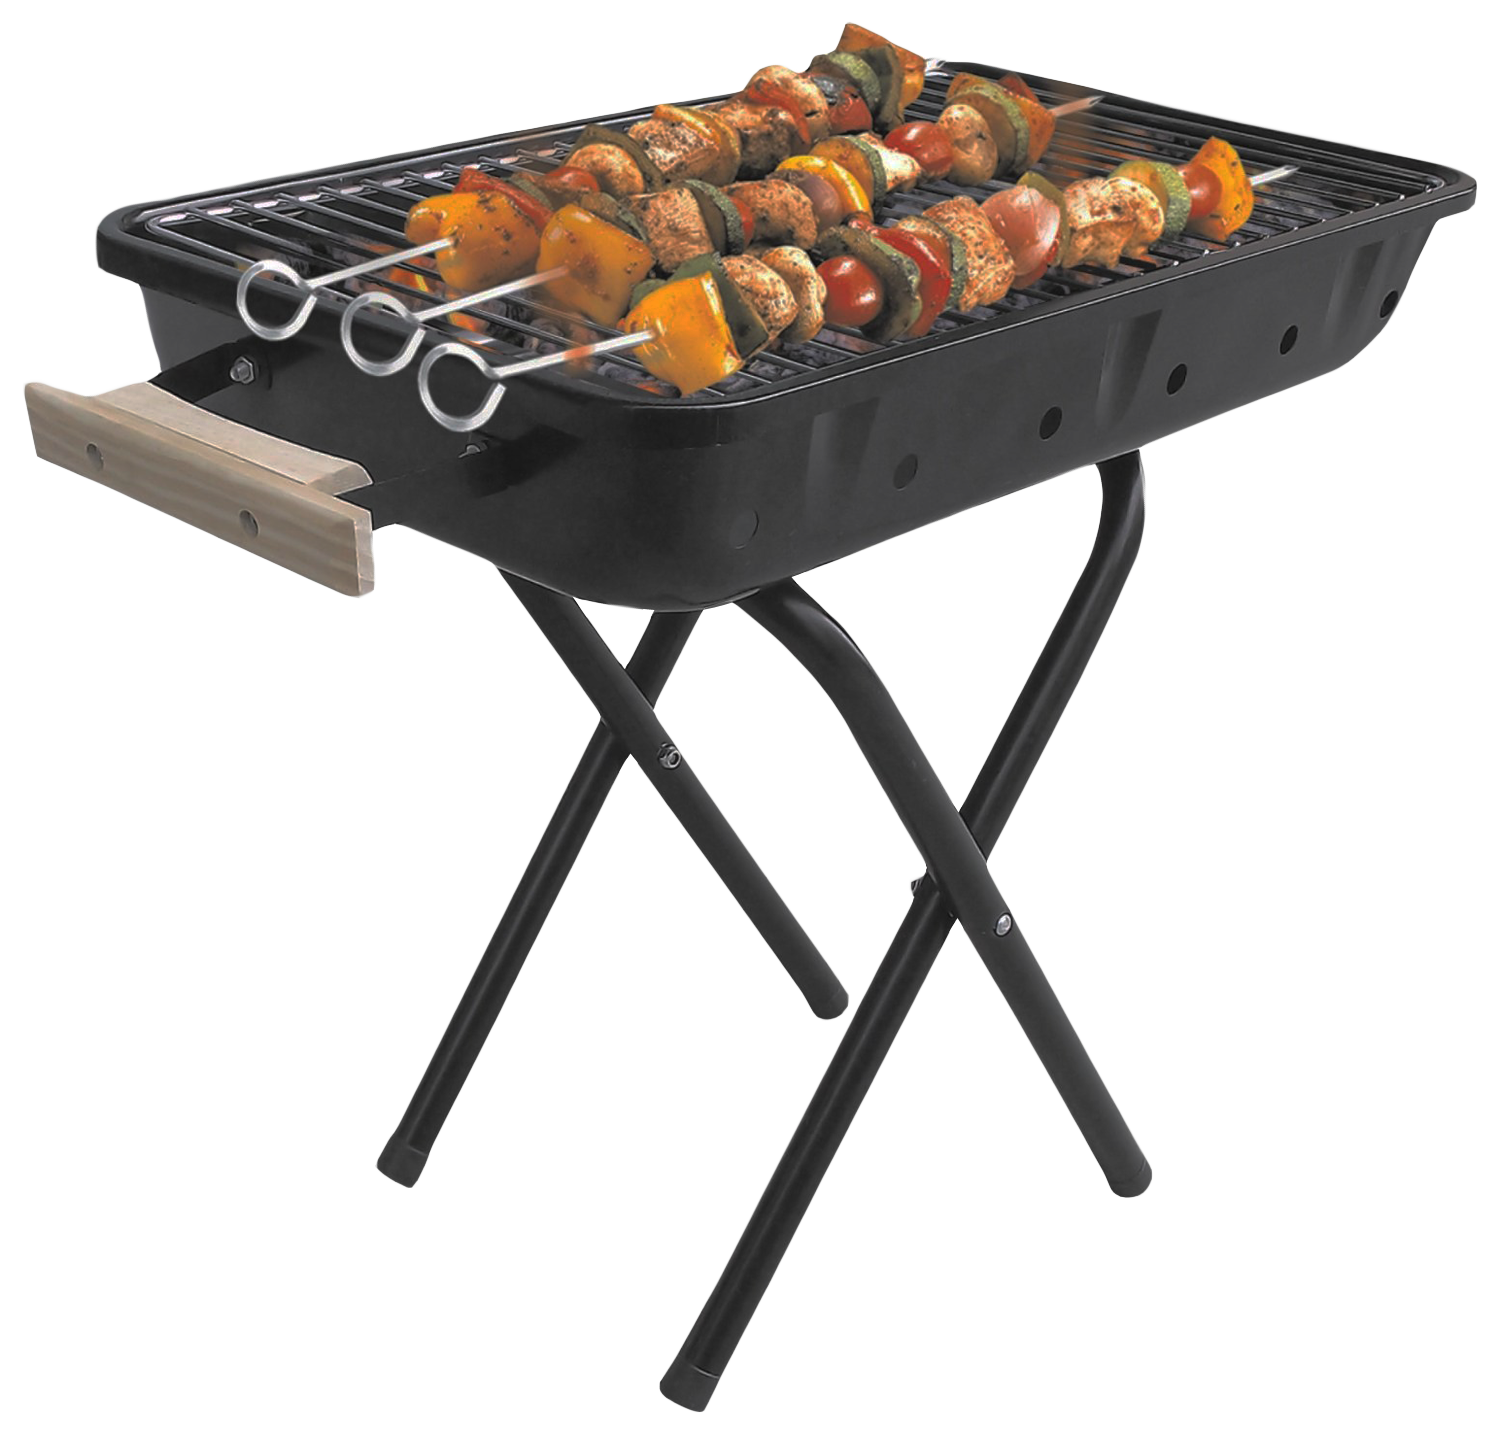 Cookout Clipart Charcoal Grill Cookout Charcoal Grill Transparent Free